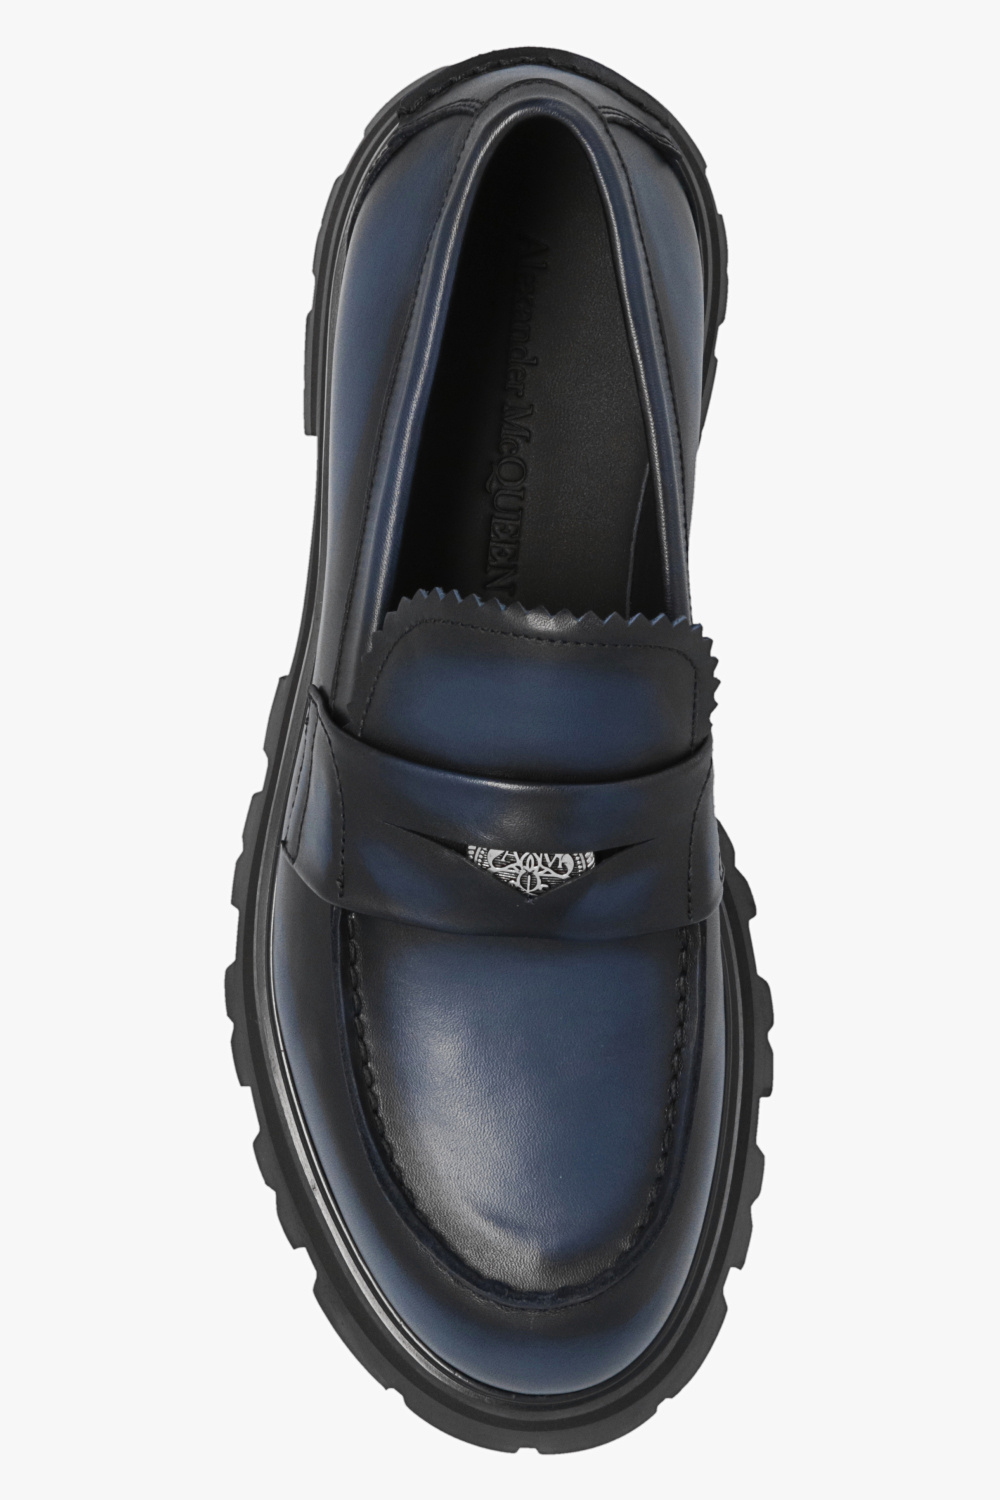 Alexander McQueen Leather loafers